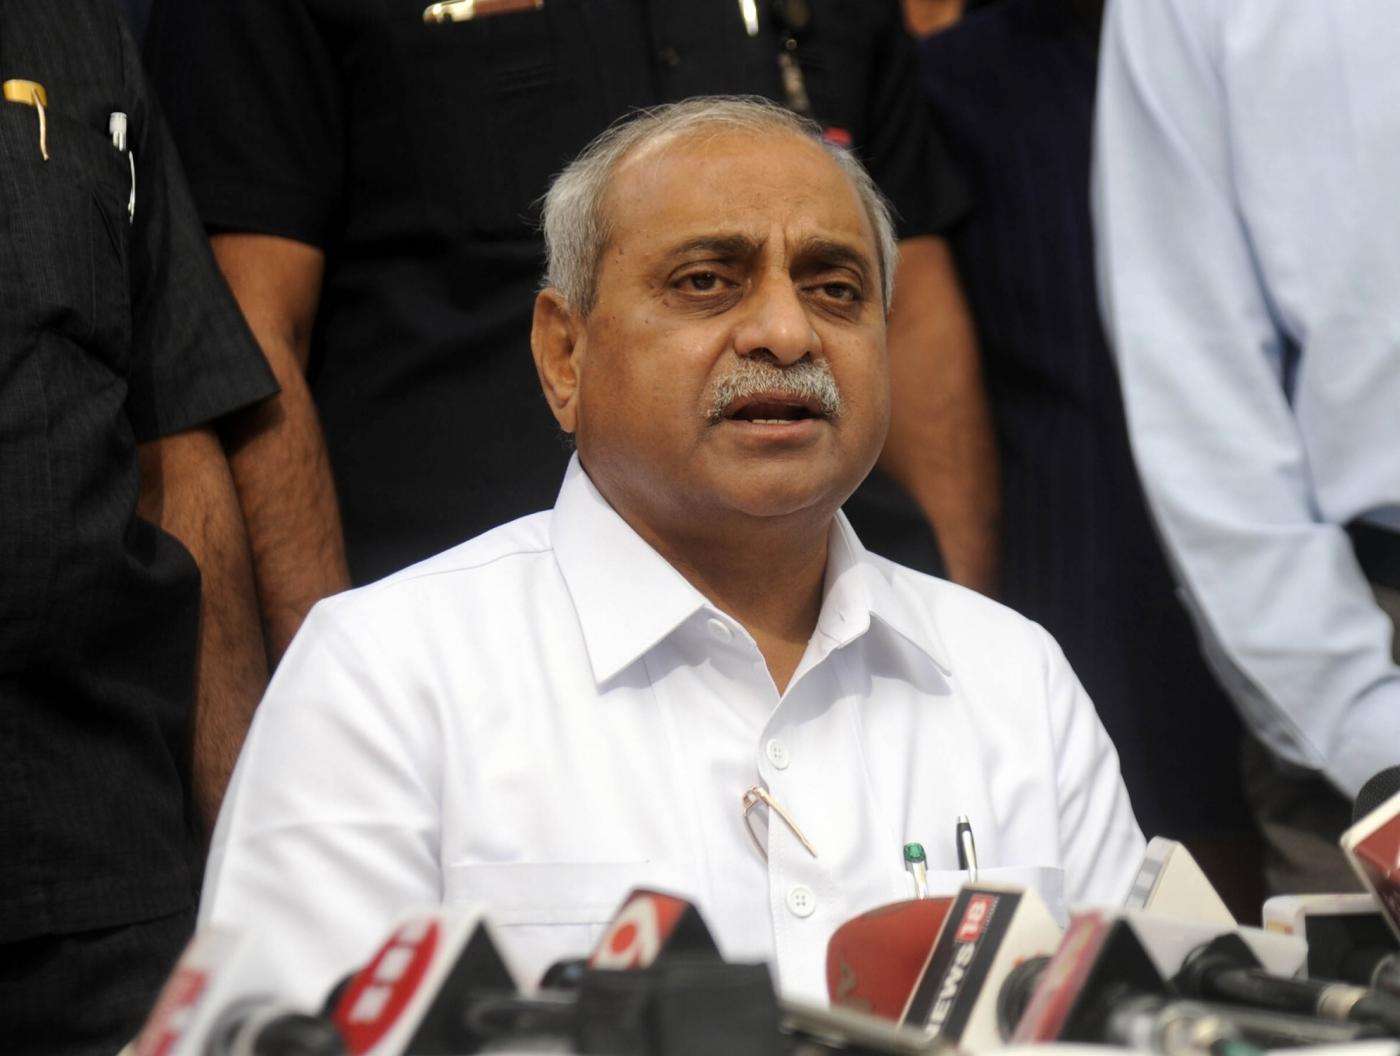 Gandhinagar: Gujarat Deputy Chief Minister Nitin Patel talks to the press after assuming charge as a cabinet minister in Gandhinagar on Dec 31, 2017. He assumed charge, shortly after Shah made the promise to the seven-time MLA who revolted after the portfolios of Finance, Petrochemicals and Urban Development were snatched from him and he was given ministries of lesser importance, including Health and Family Welfare. (Photo: IANS) by .